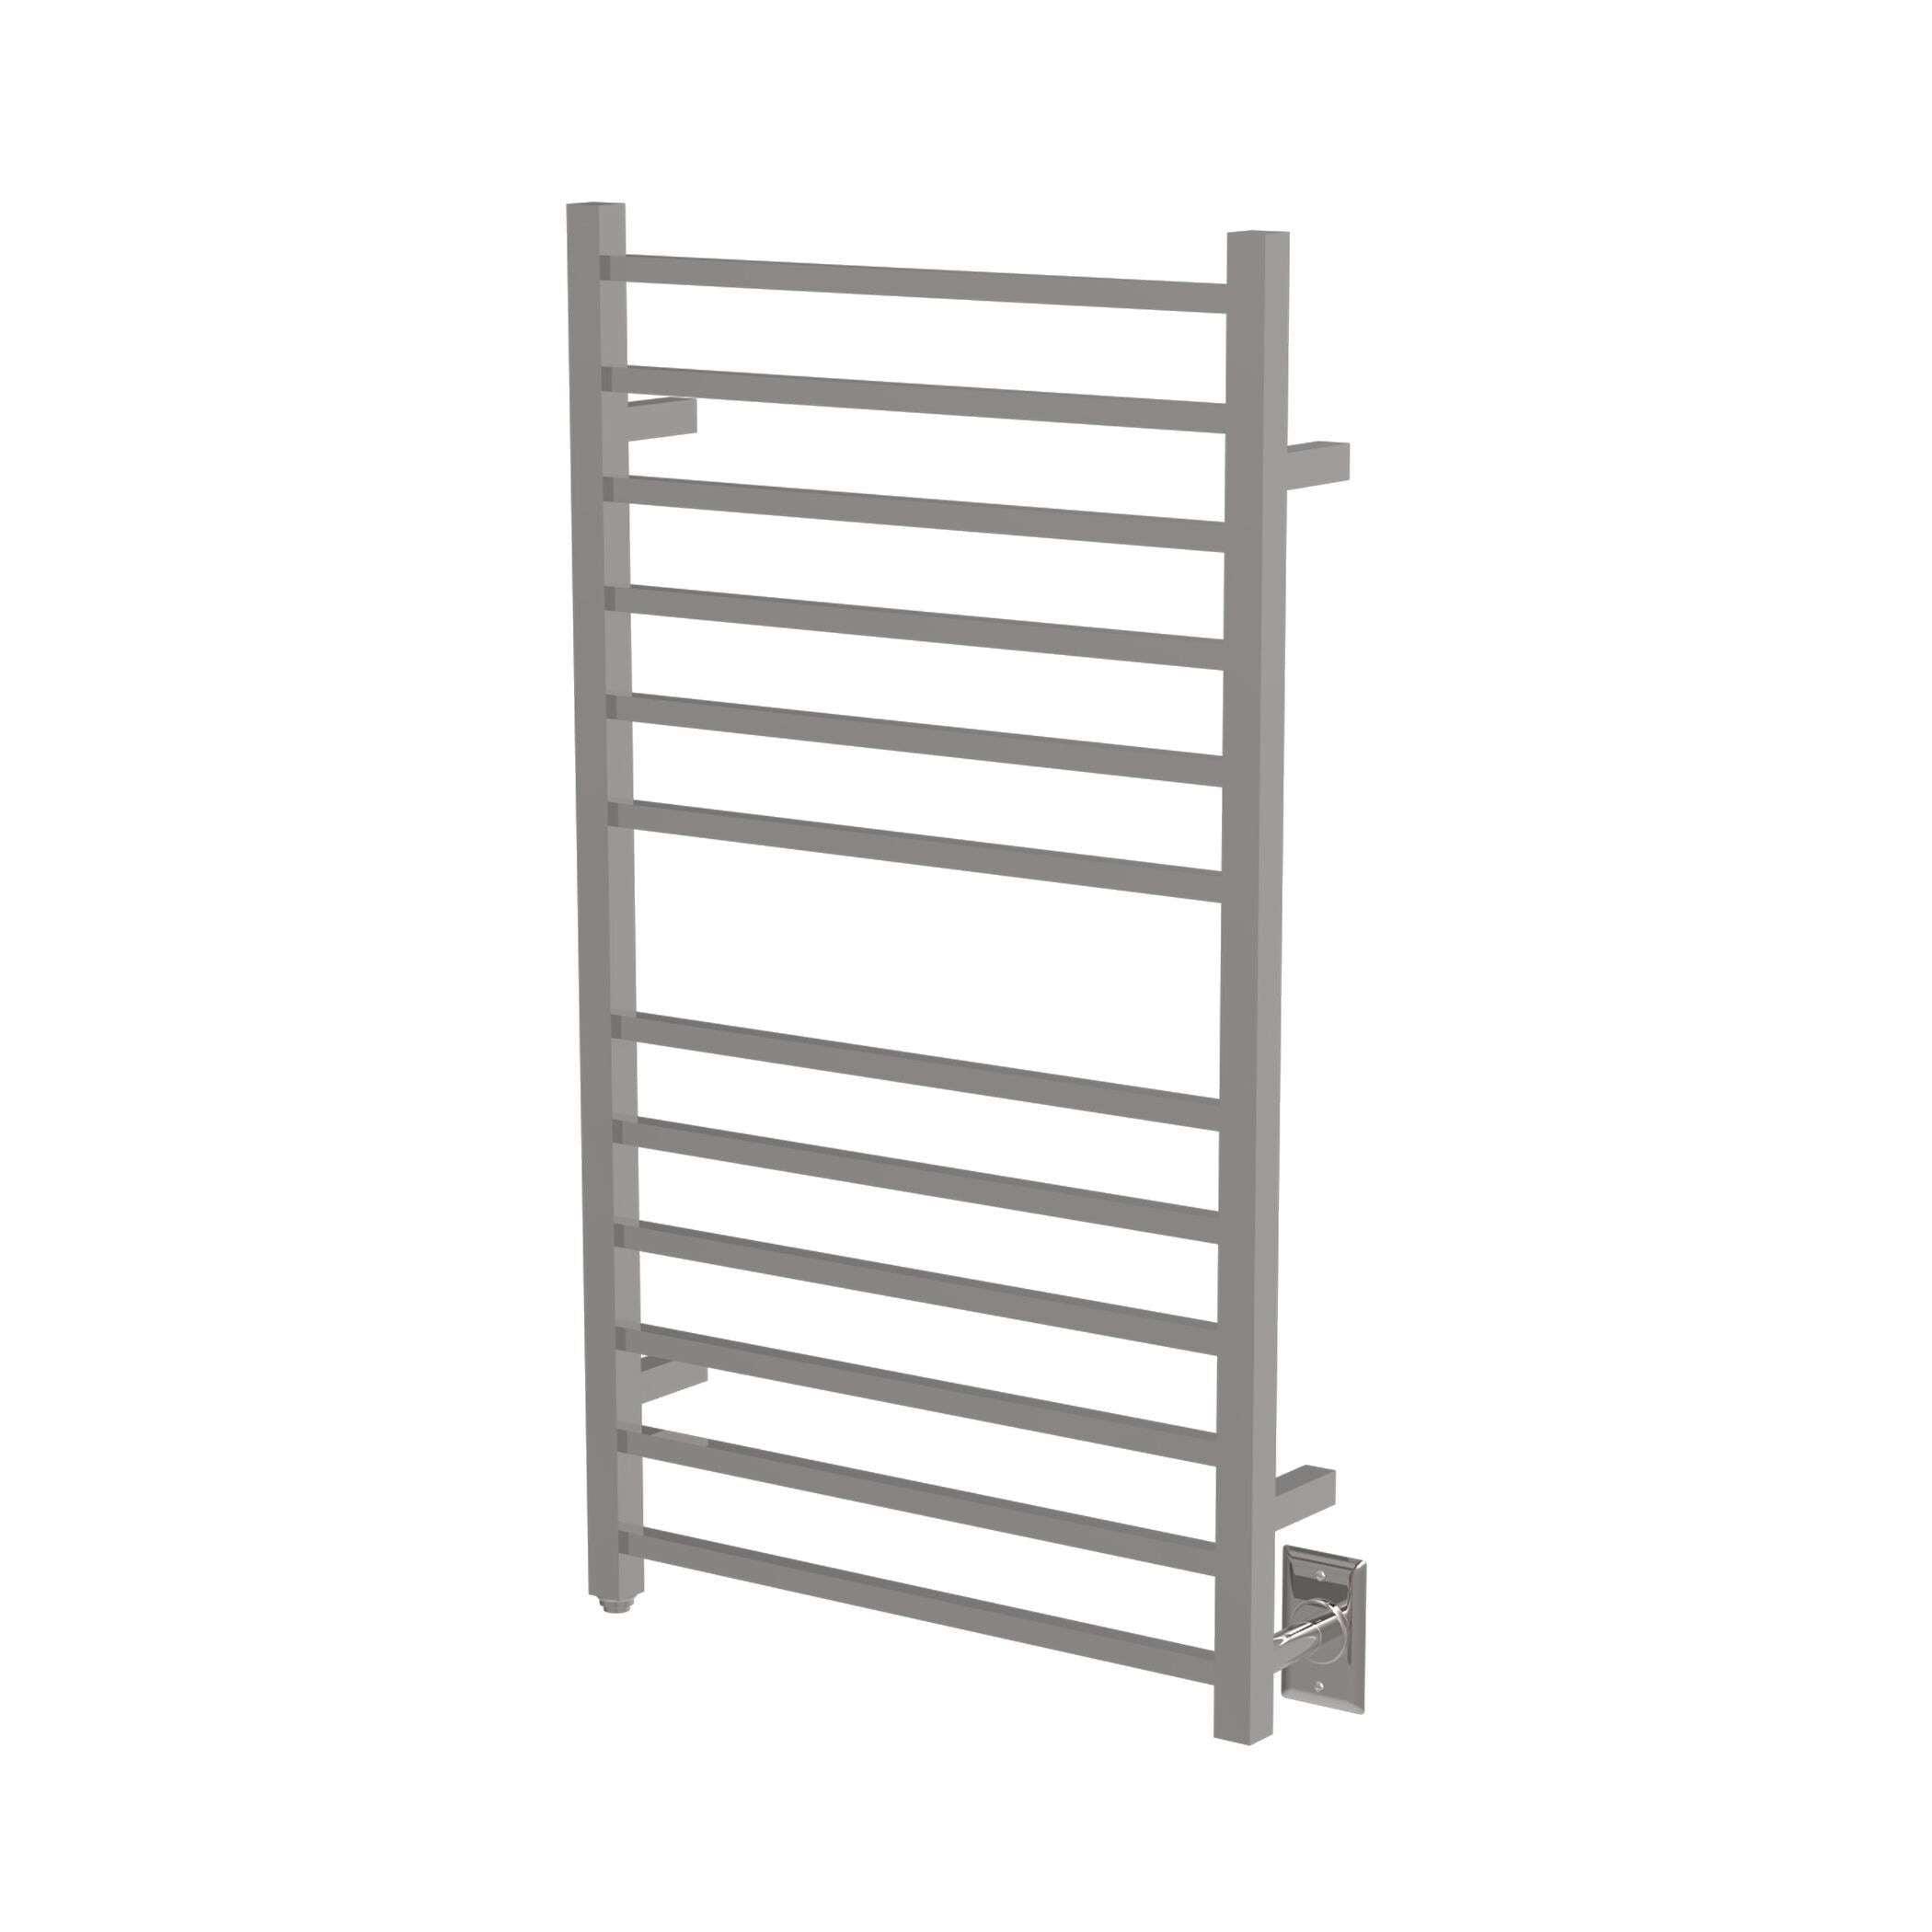 Amba Radiant Large Hardwired Square Towel Warmer - 23.6"w x 41.3"h - towelwarmers